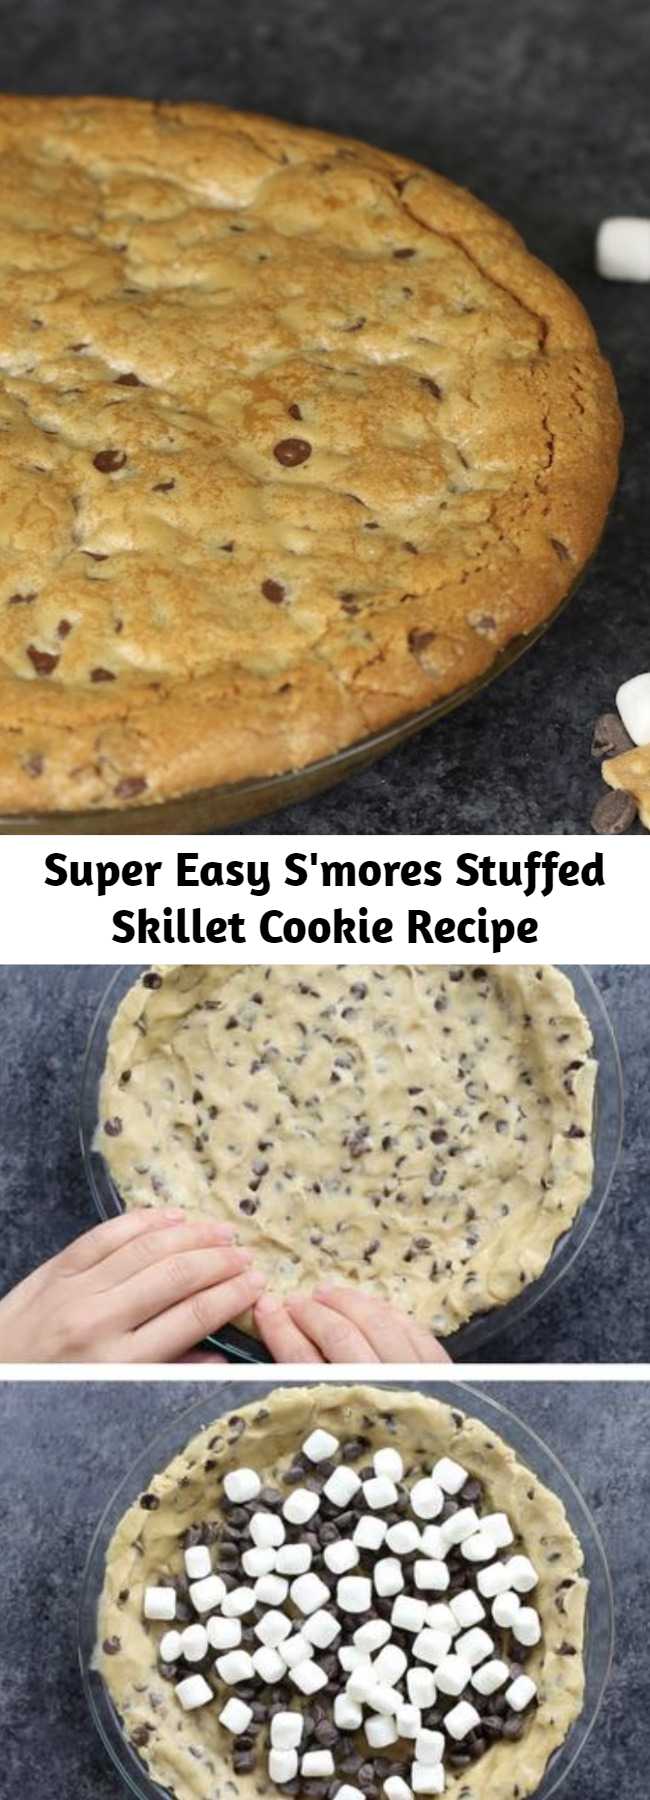 Super Easy S'mores Stuffed Skillet Cookie Recipe - This S'mores Stuffed Skillet Cookie is chocolate chip cookie dough stuffed with marshmallows, chocolate chips and graham crackers. It's a drool-worthy dessert that's perfect for a party and sharing with your best friends!